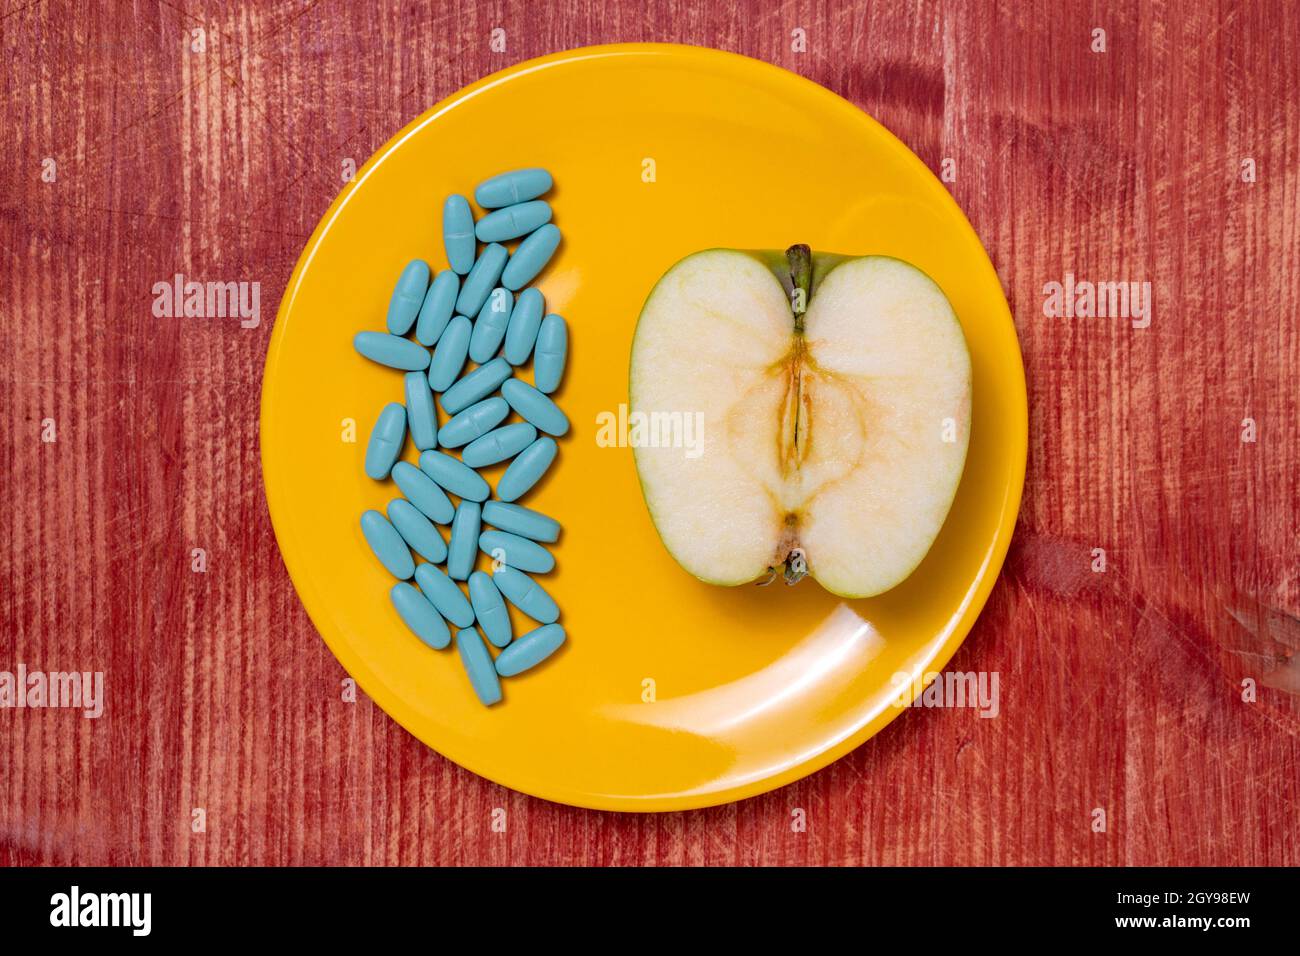 Drawing up a diet. Pills in a plate with an apple half on a wooden table.  Healthy eating, diet, lifestyle concept. Stock Photo